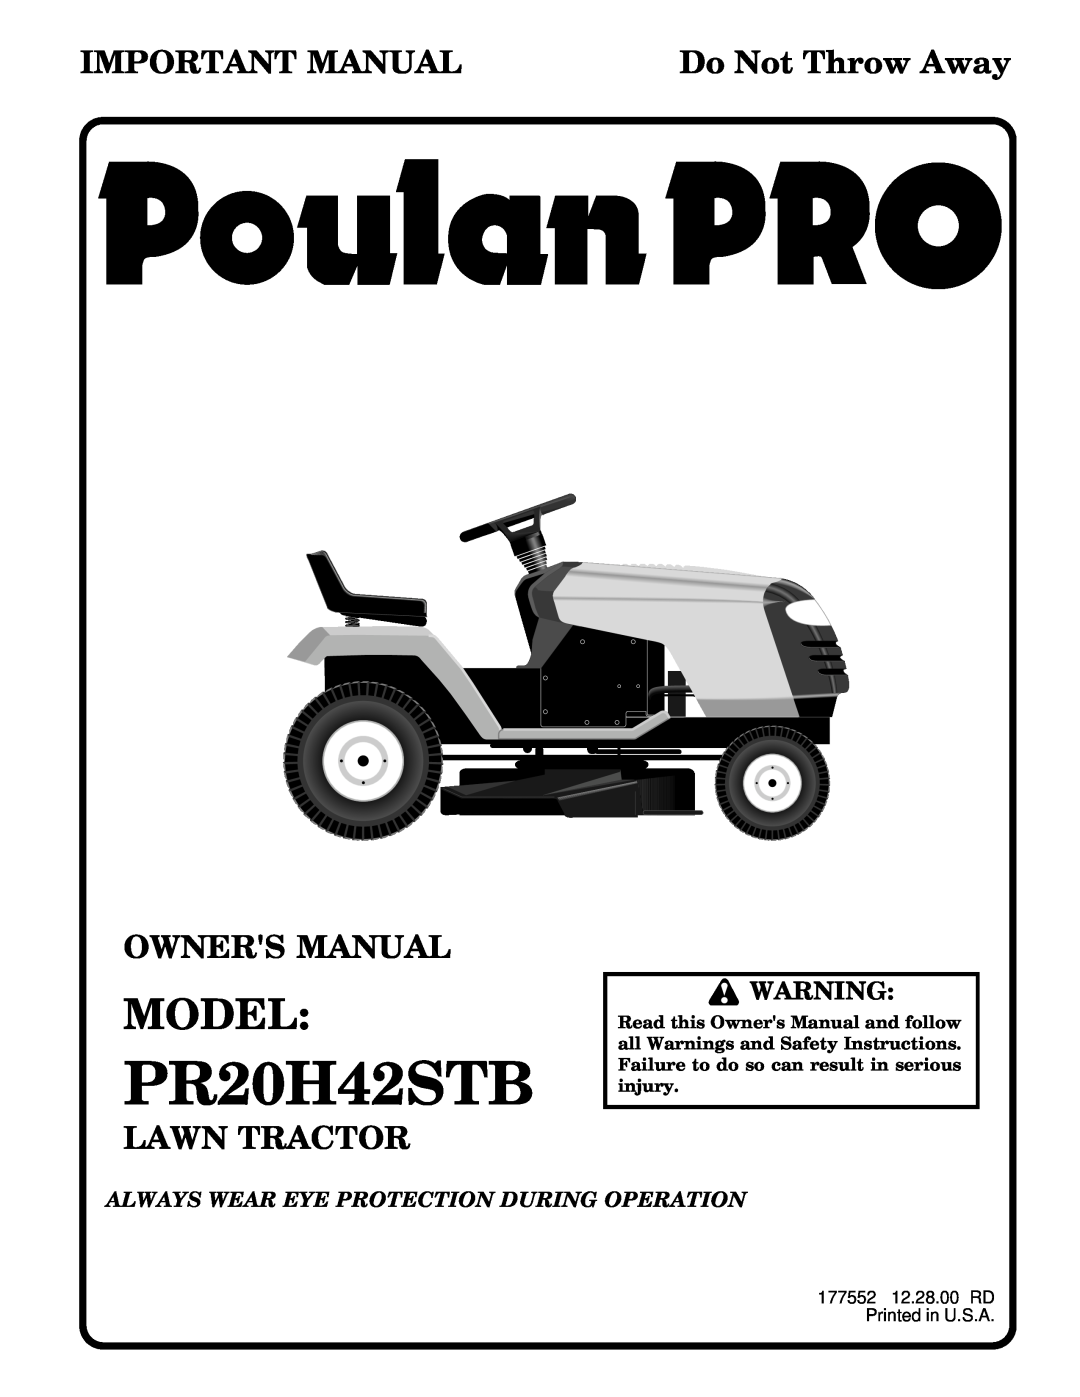 Poulan PR20H42STB owner manual Model, Important Manual, Do Not Throw Away, Lawn Tractor 